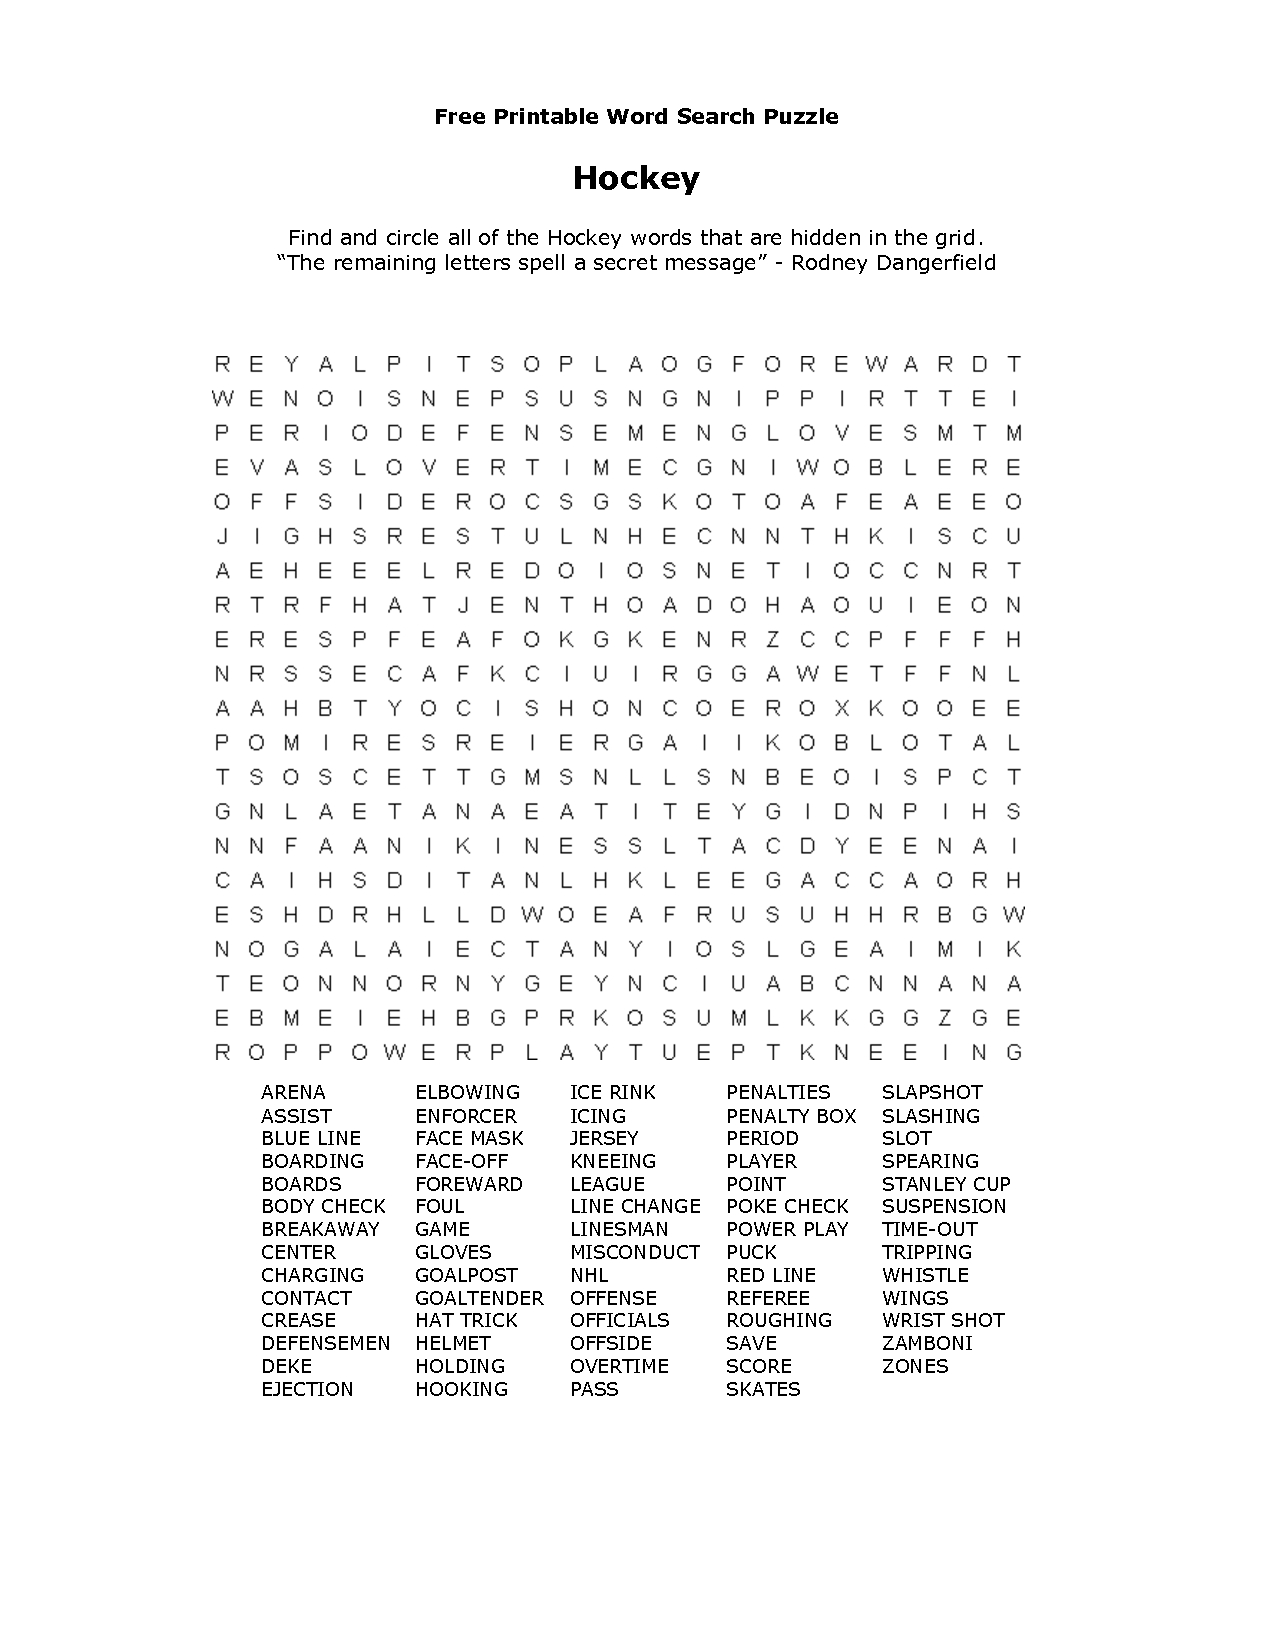 Free Printable Word Searches | Word Search Printables, Free